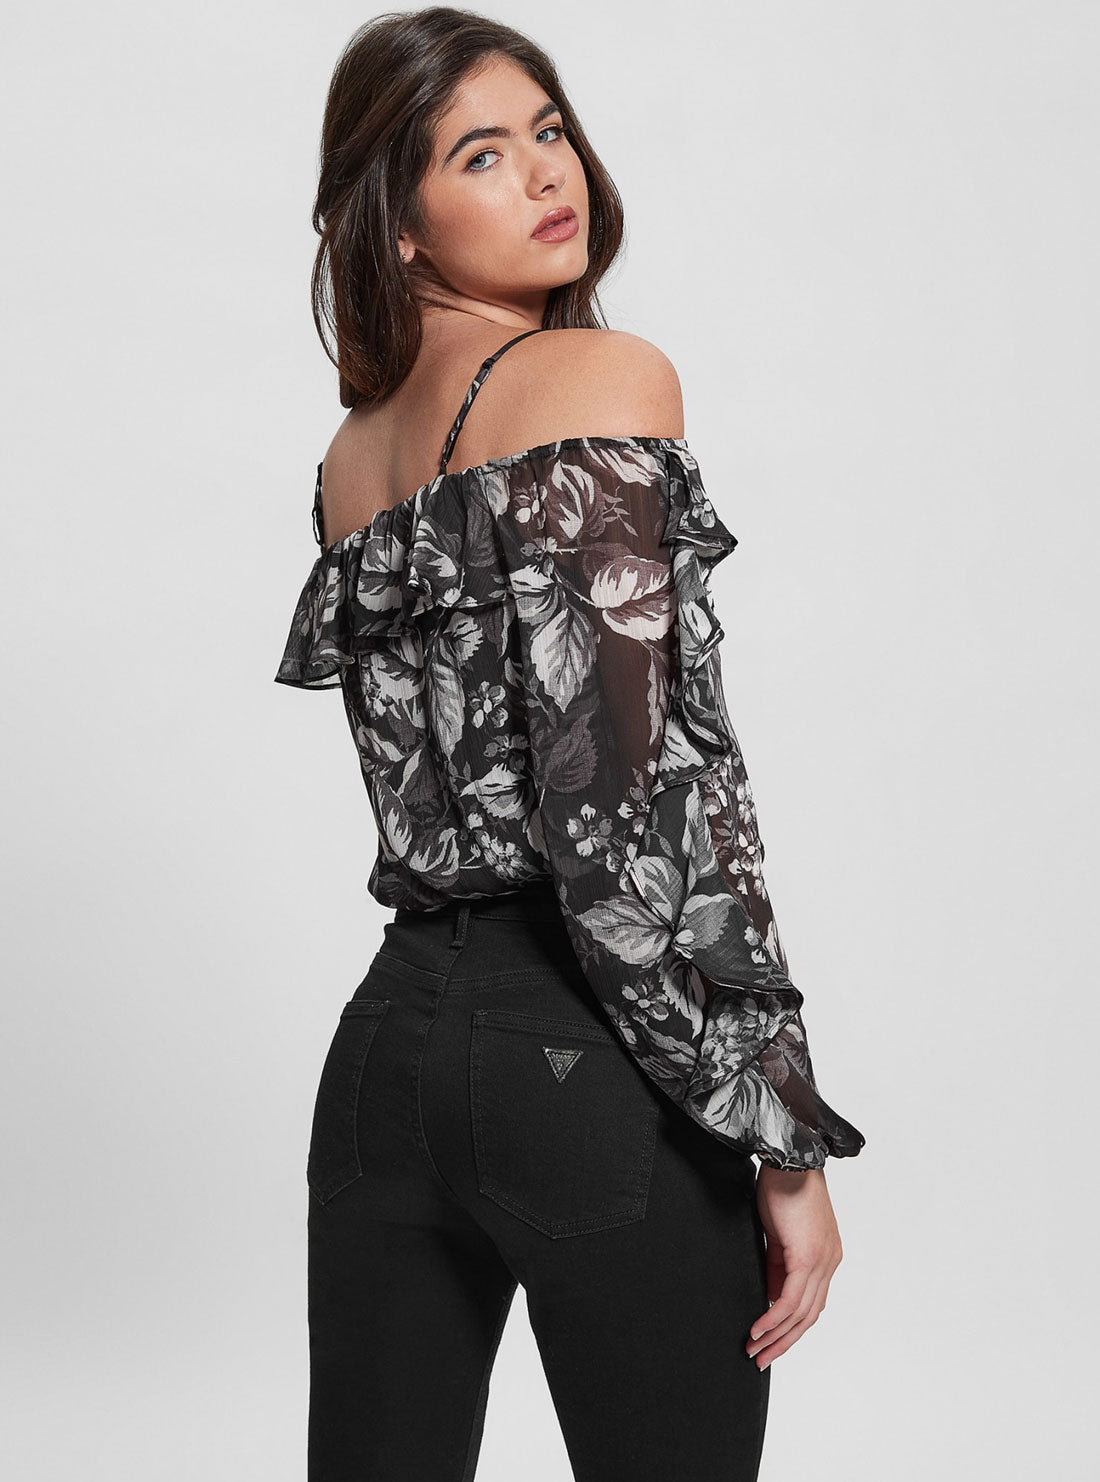 Black Floral Iggy Top | GUESS Women's Apparel | back view